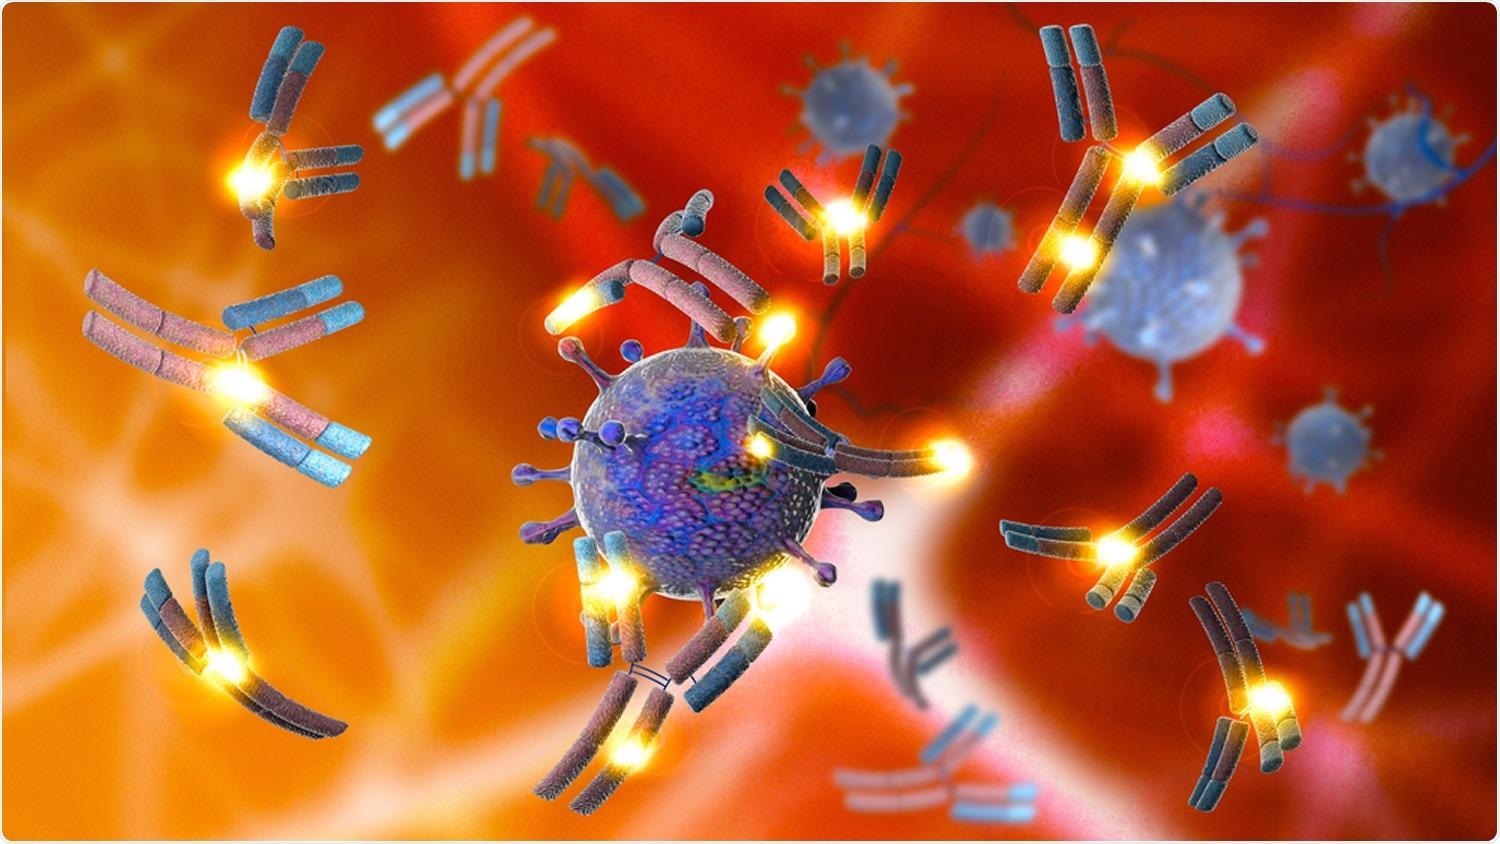 Study: Magnitude and breadth of neutralizing antibody responses elicited by SARS-CoV-2 infection or vaccination. Image Credit: Naeblys / Shutterstock